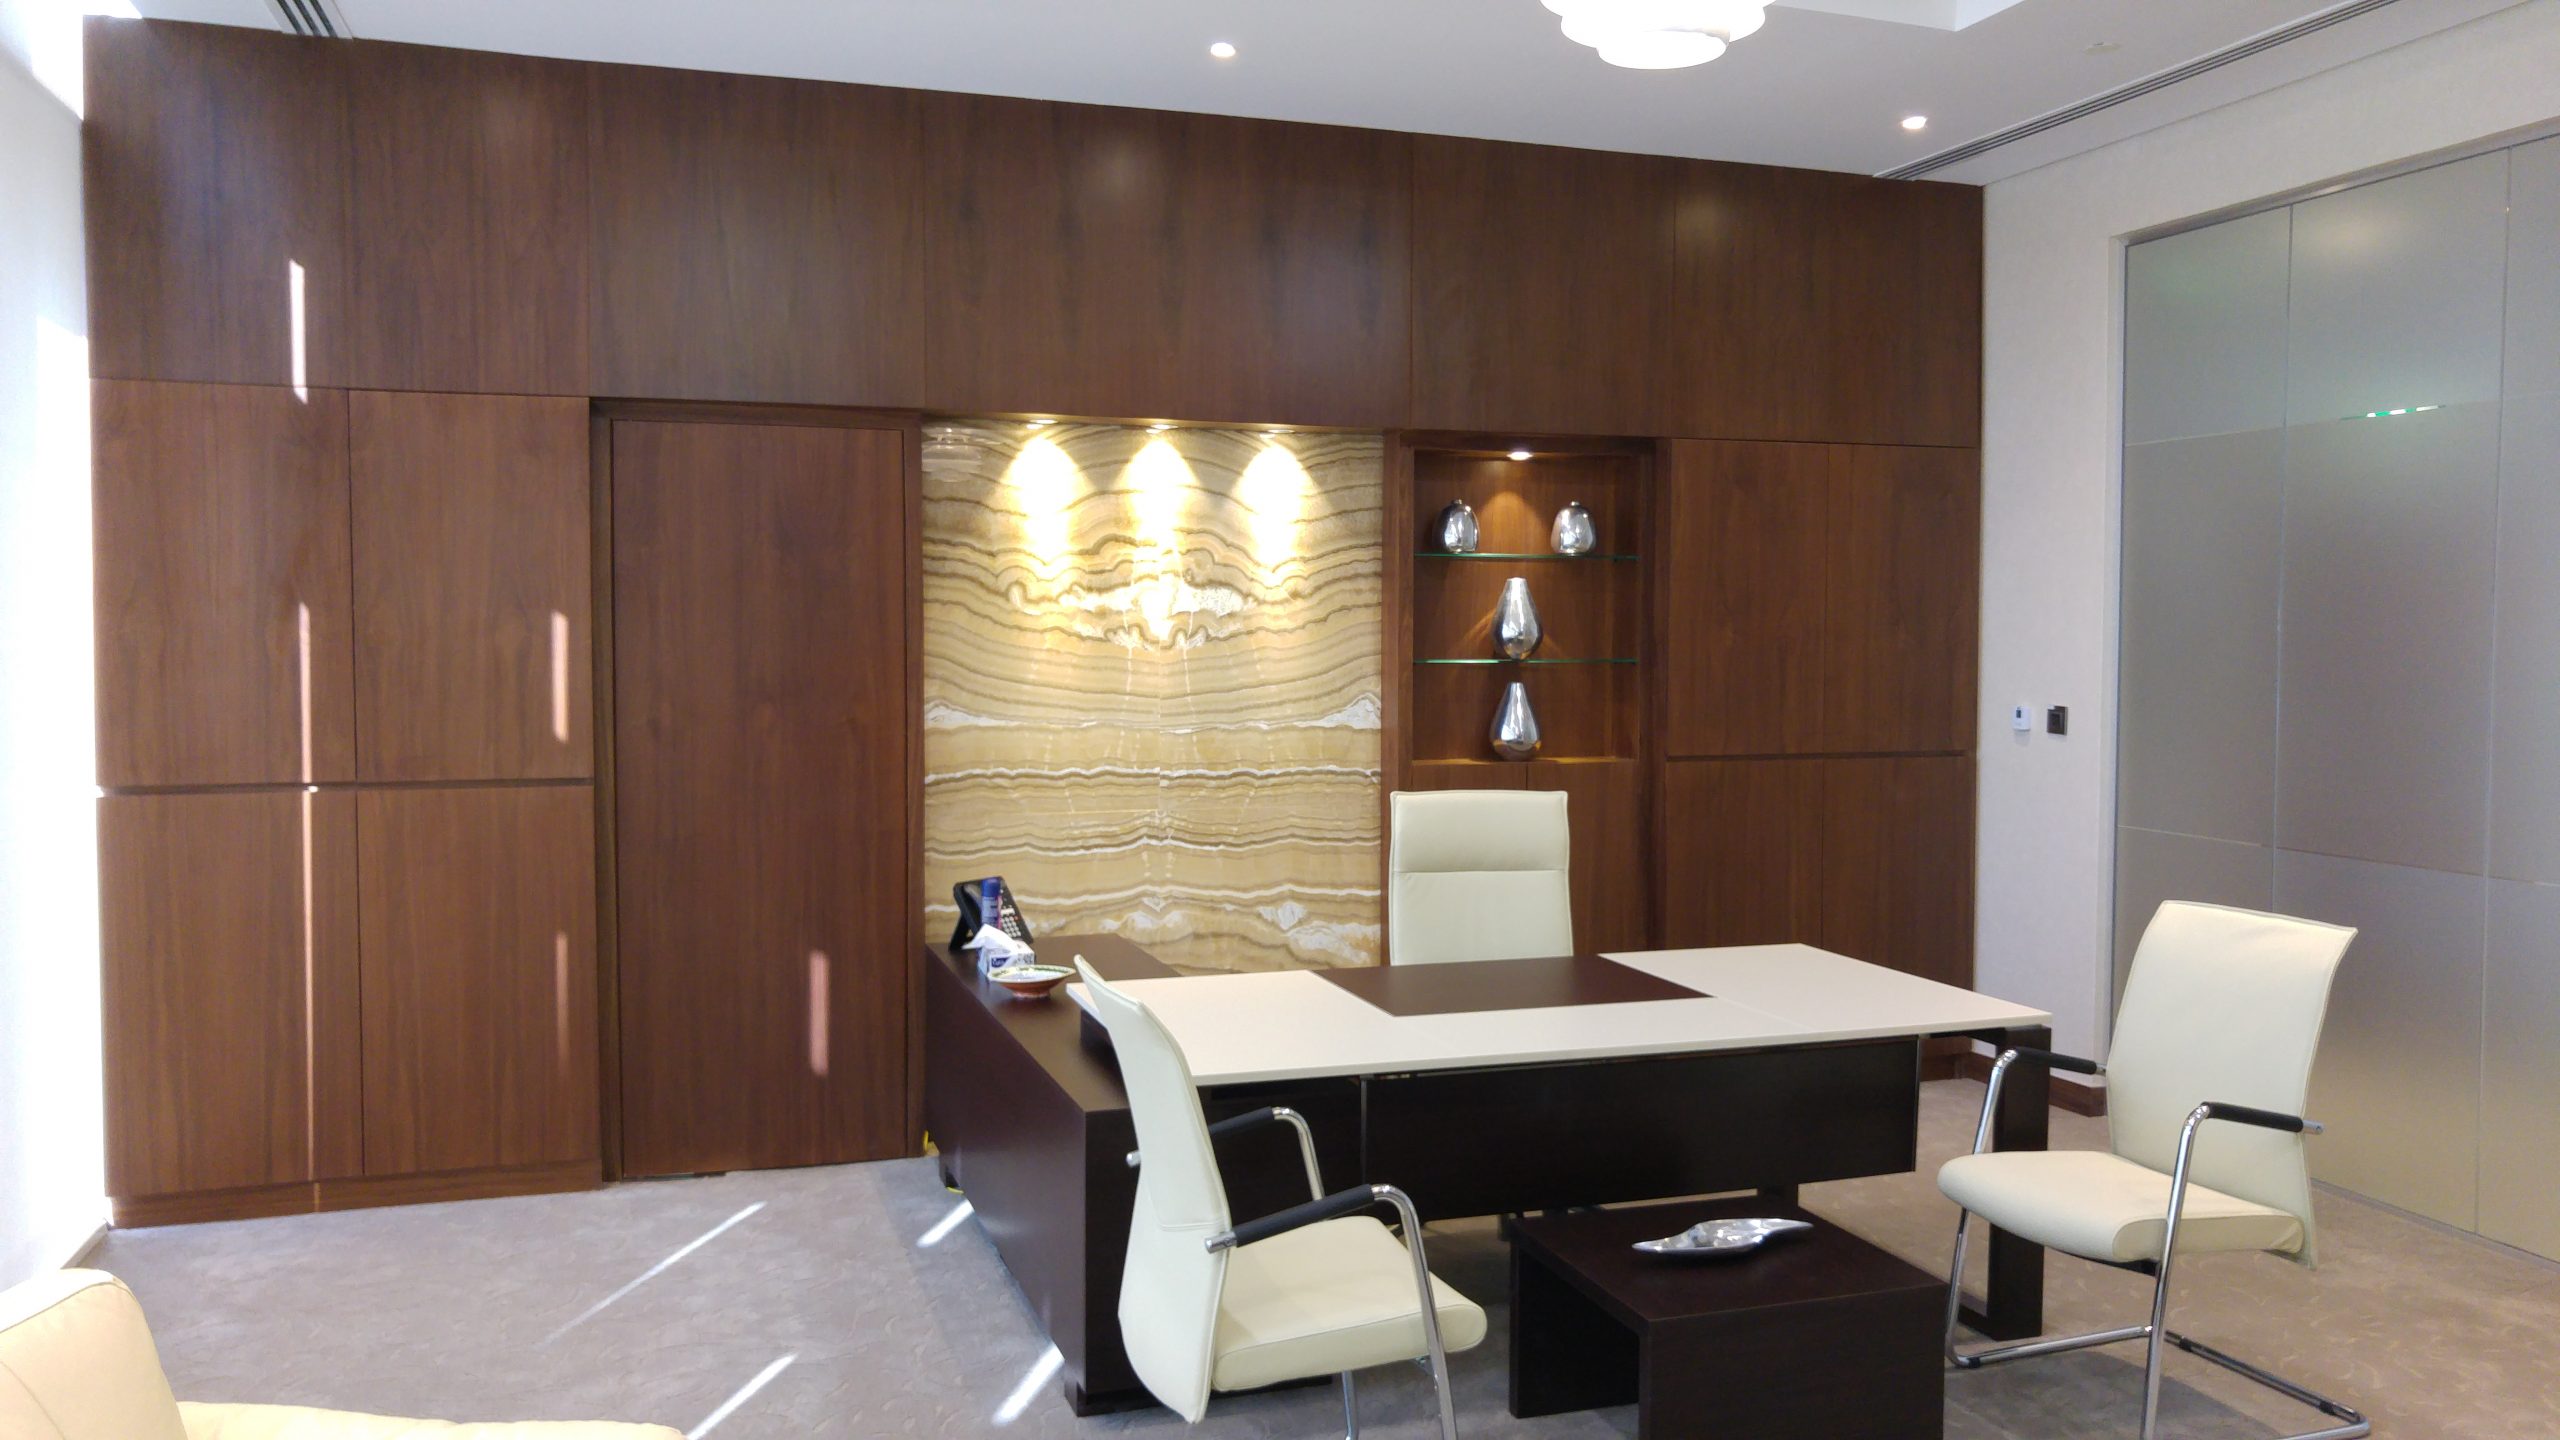 Tristar Real Estate Office | Commercial Office Interior Fit Out | Capstone